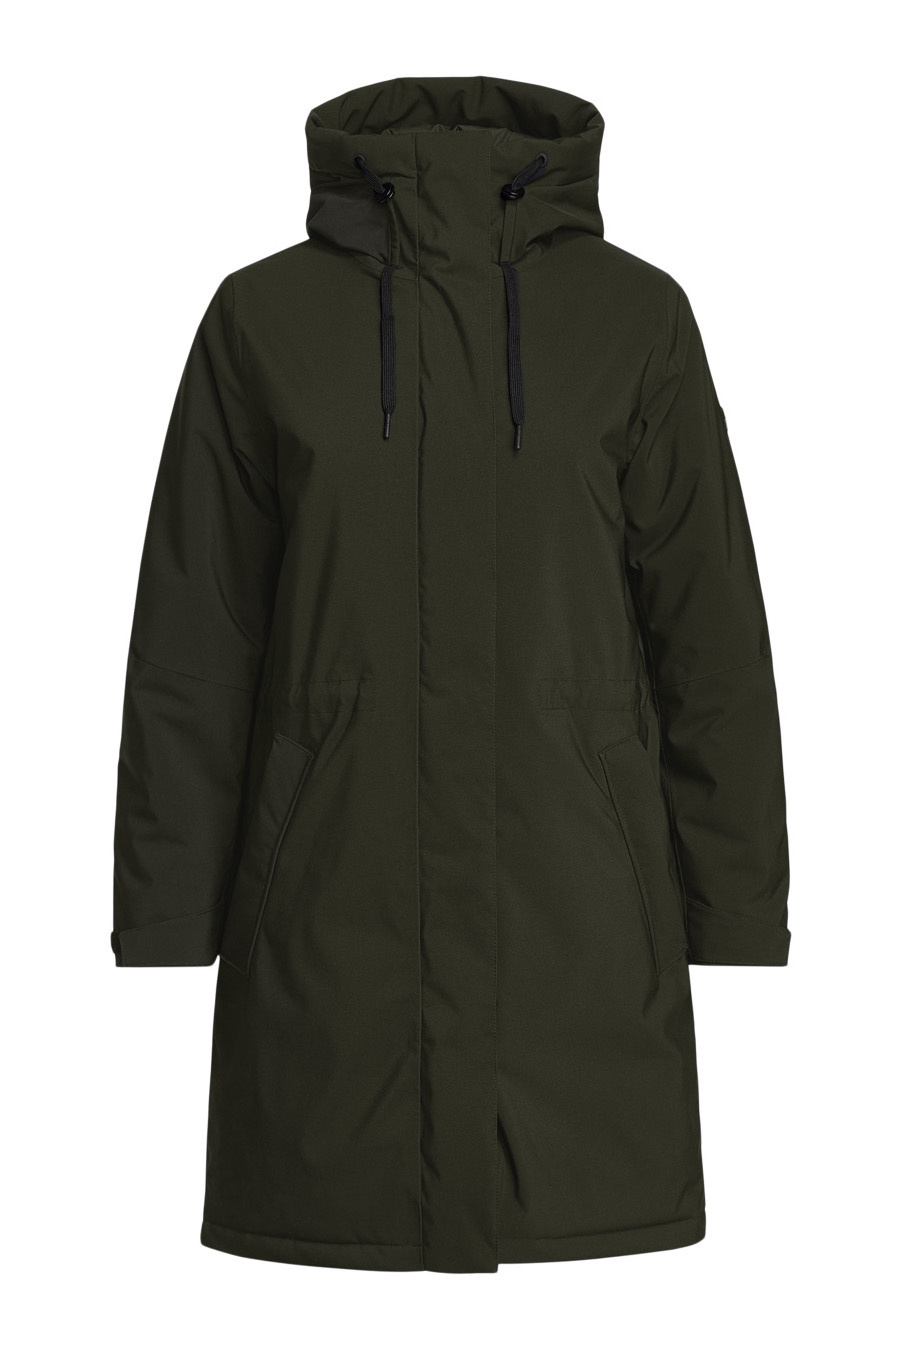 W Unified Insulated Parka - Olive Extreme-1